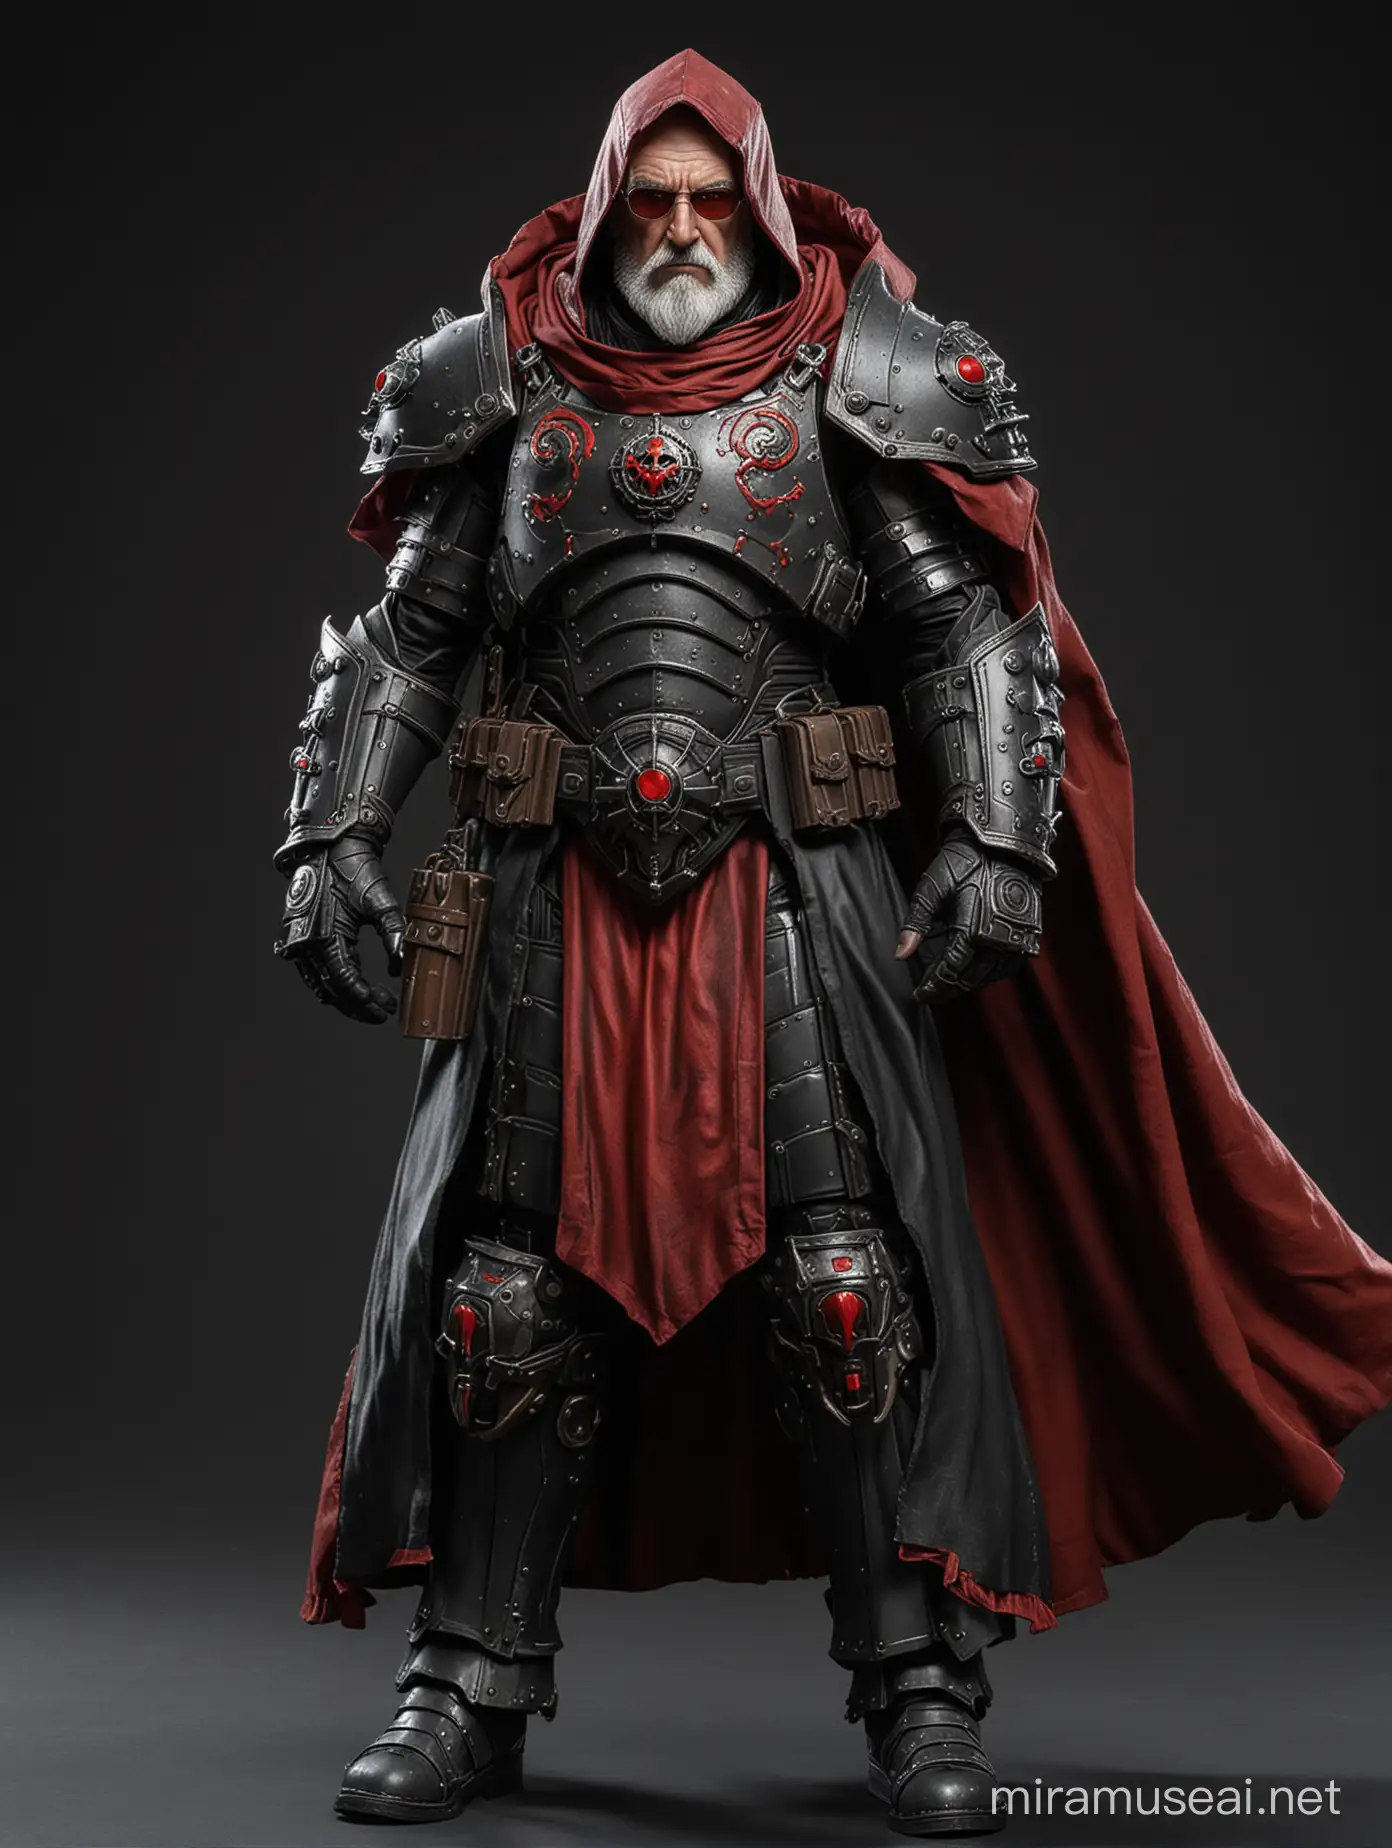 Full body image of 50 year old male inquisitor wearing heavy black warhammer 40k power armor with a cloak of red flowing over the power armor. No helmet but a hood thats connected to the cloak. No weapon. Dark background in image. short grey beard.